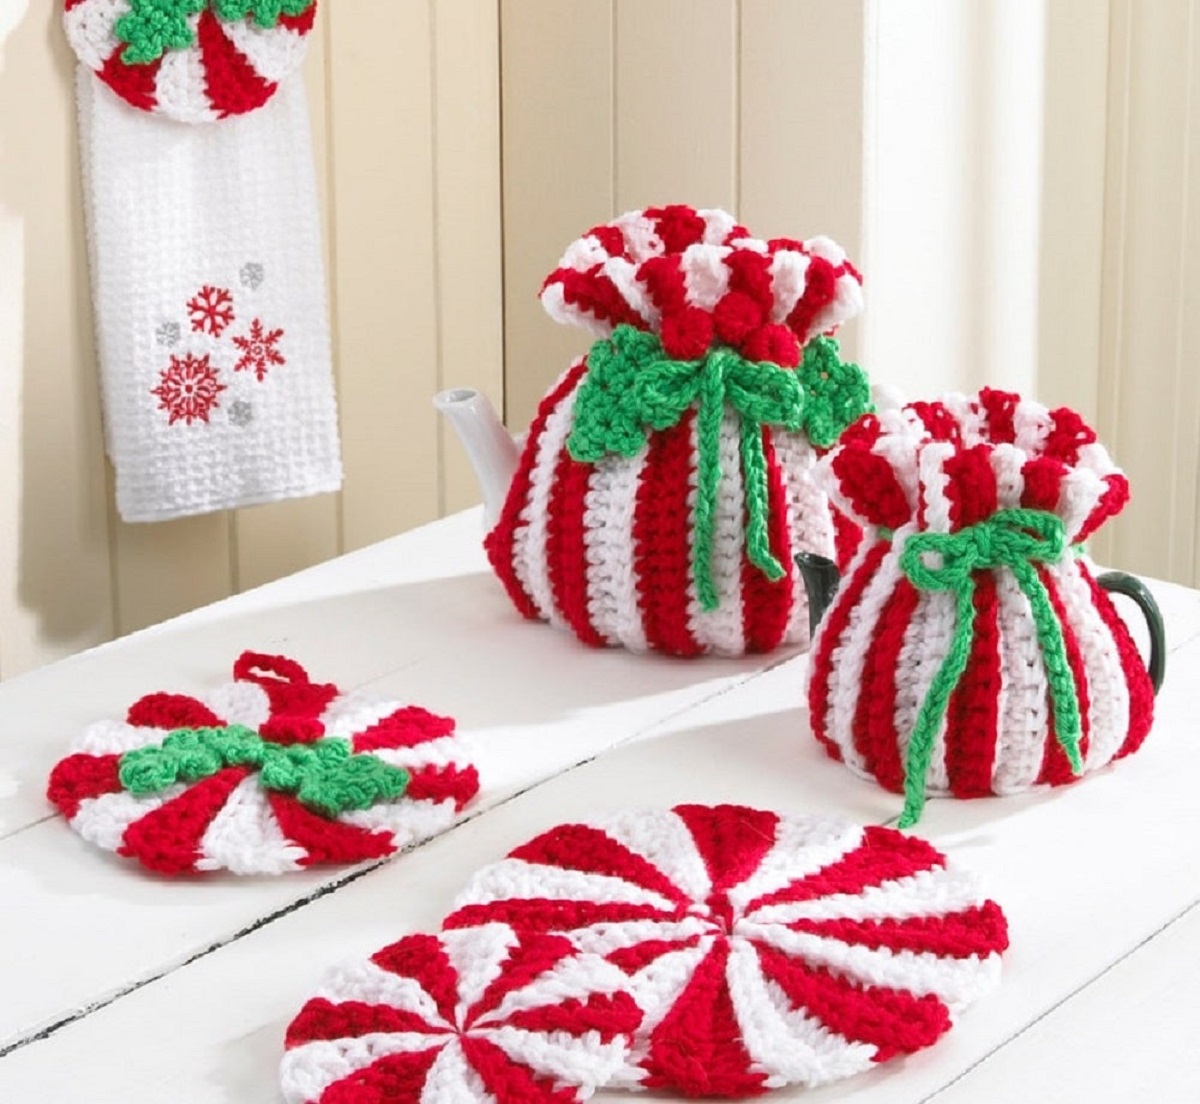 Red and white peppermint style coasters next to a tea cozy and milk jug cover in the same style with a green bow around them. 